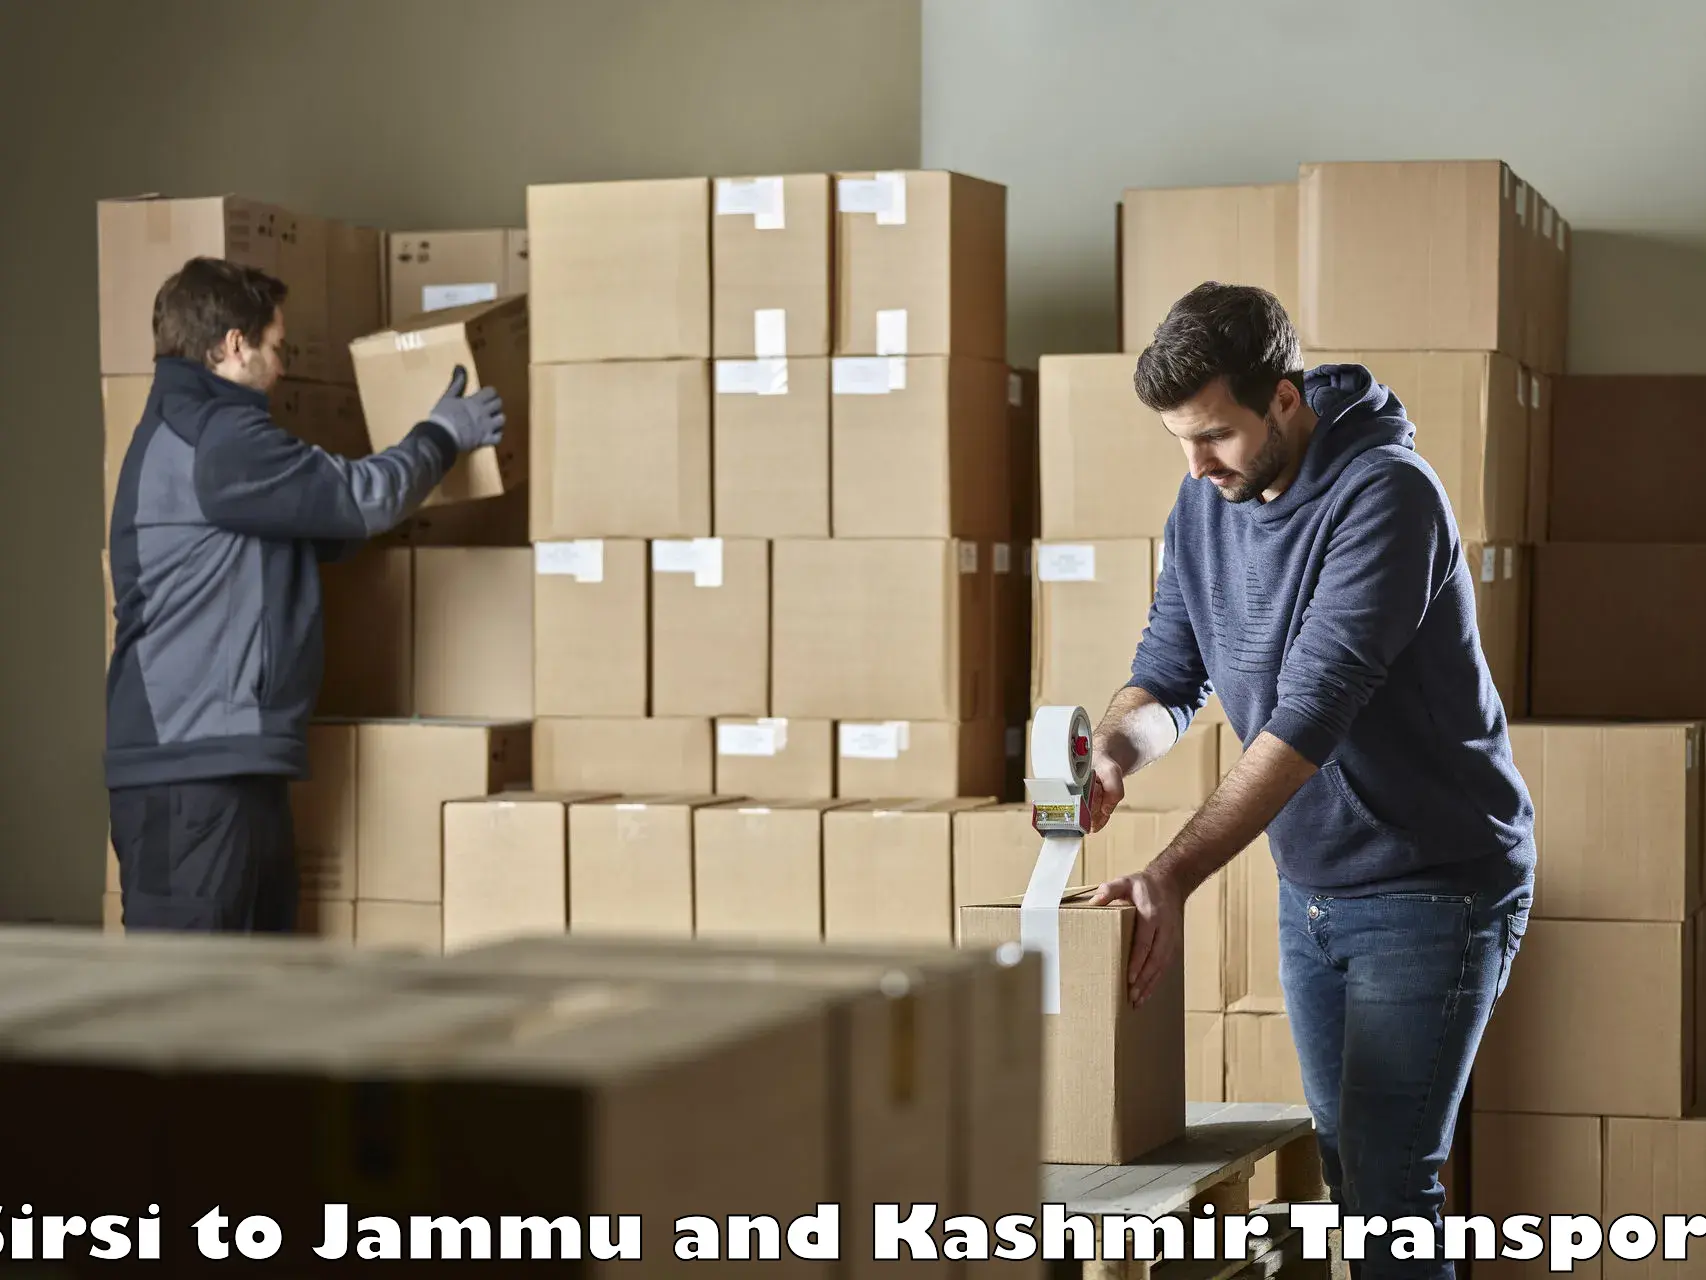 Commercial transport service Sirsi to IIT Jammu